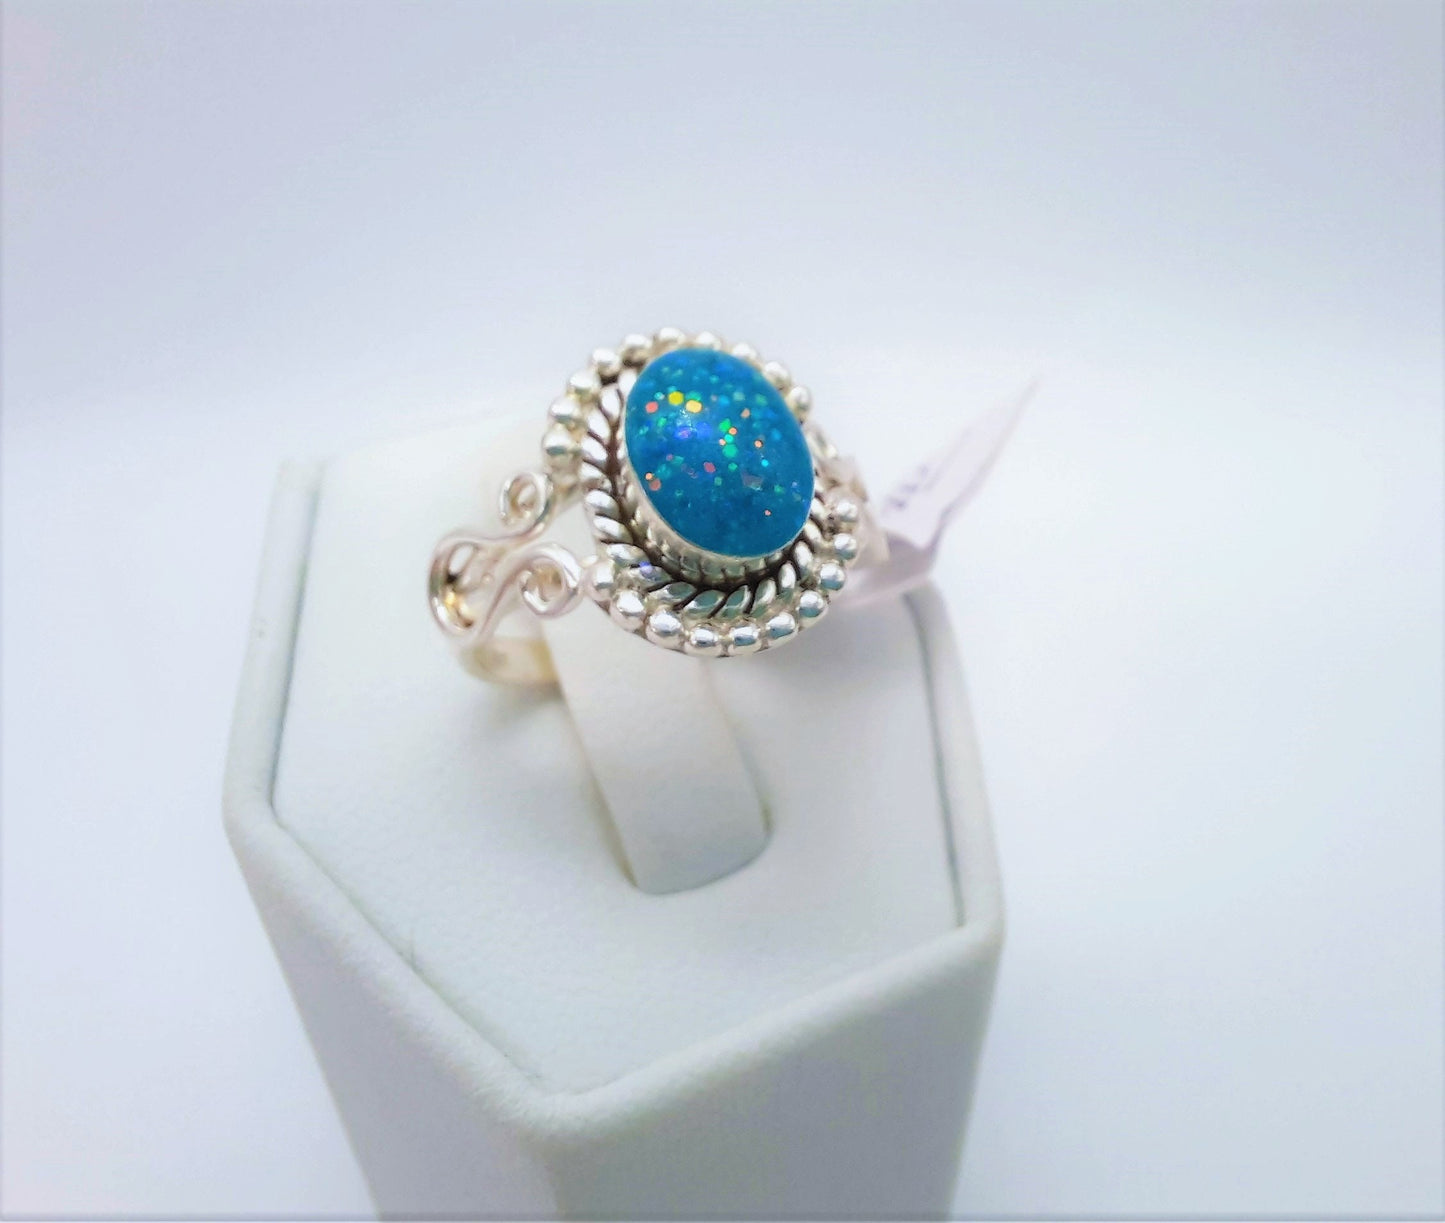 Handcrafted / Handmade Antiqued 925 Sterling Silver Ring, Oval, Size 7, Made with Iridescent Teal Blue Resin, Glitter, & Holographic Powder